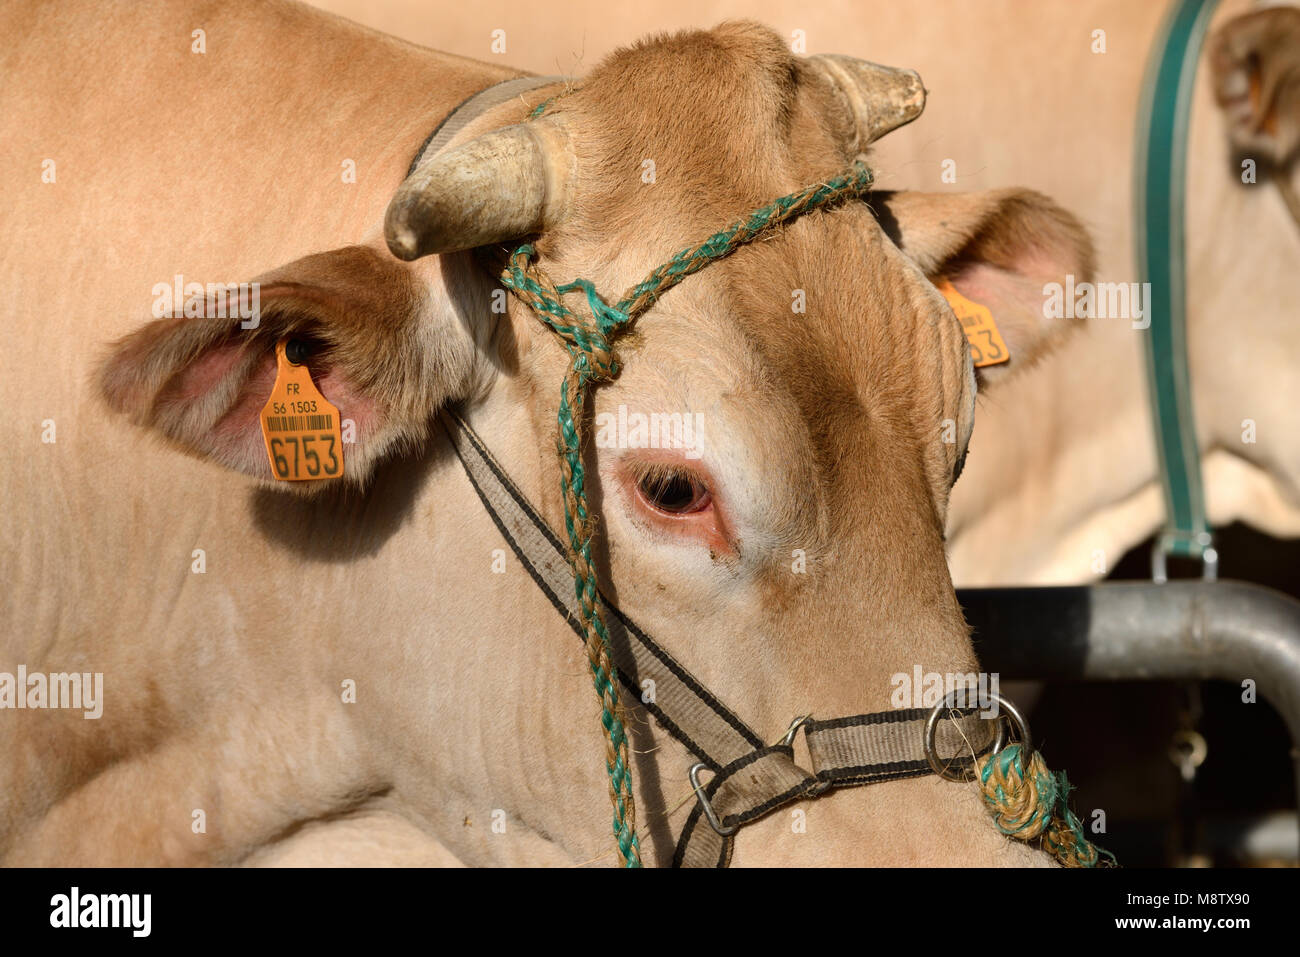 Portrait of Blonde d'Aquitaine Beef Cow or Cattle with Identification Tag or Bar Code Ear Tag Stock Photo